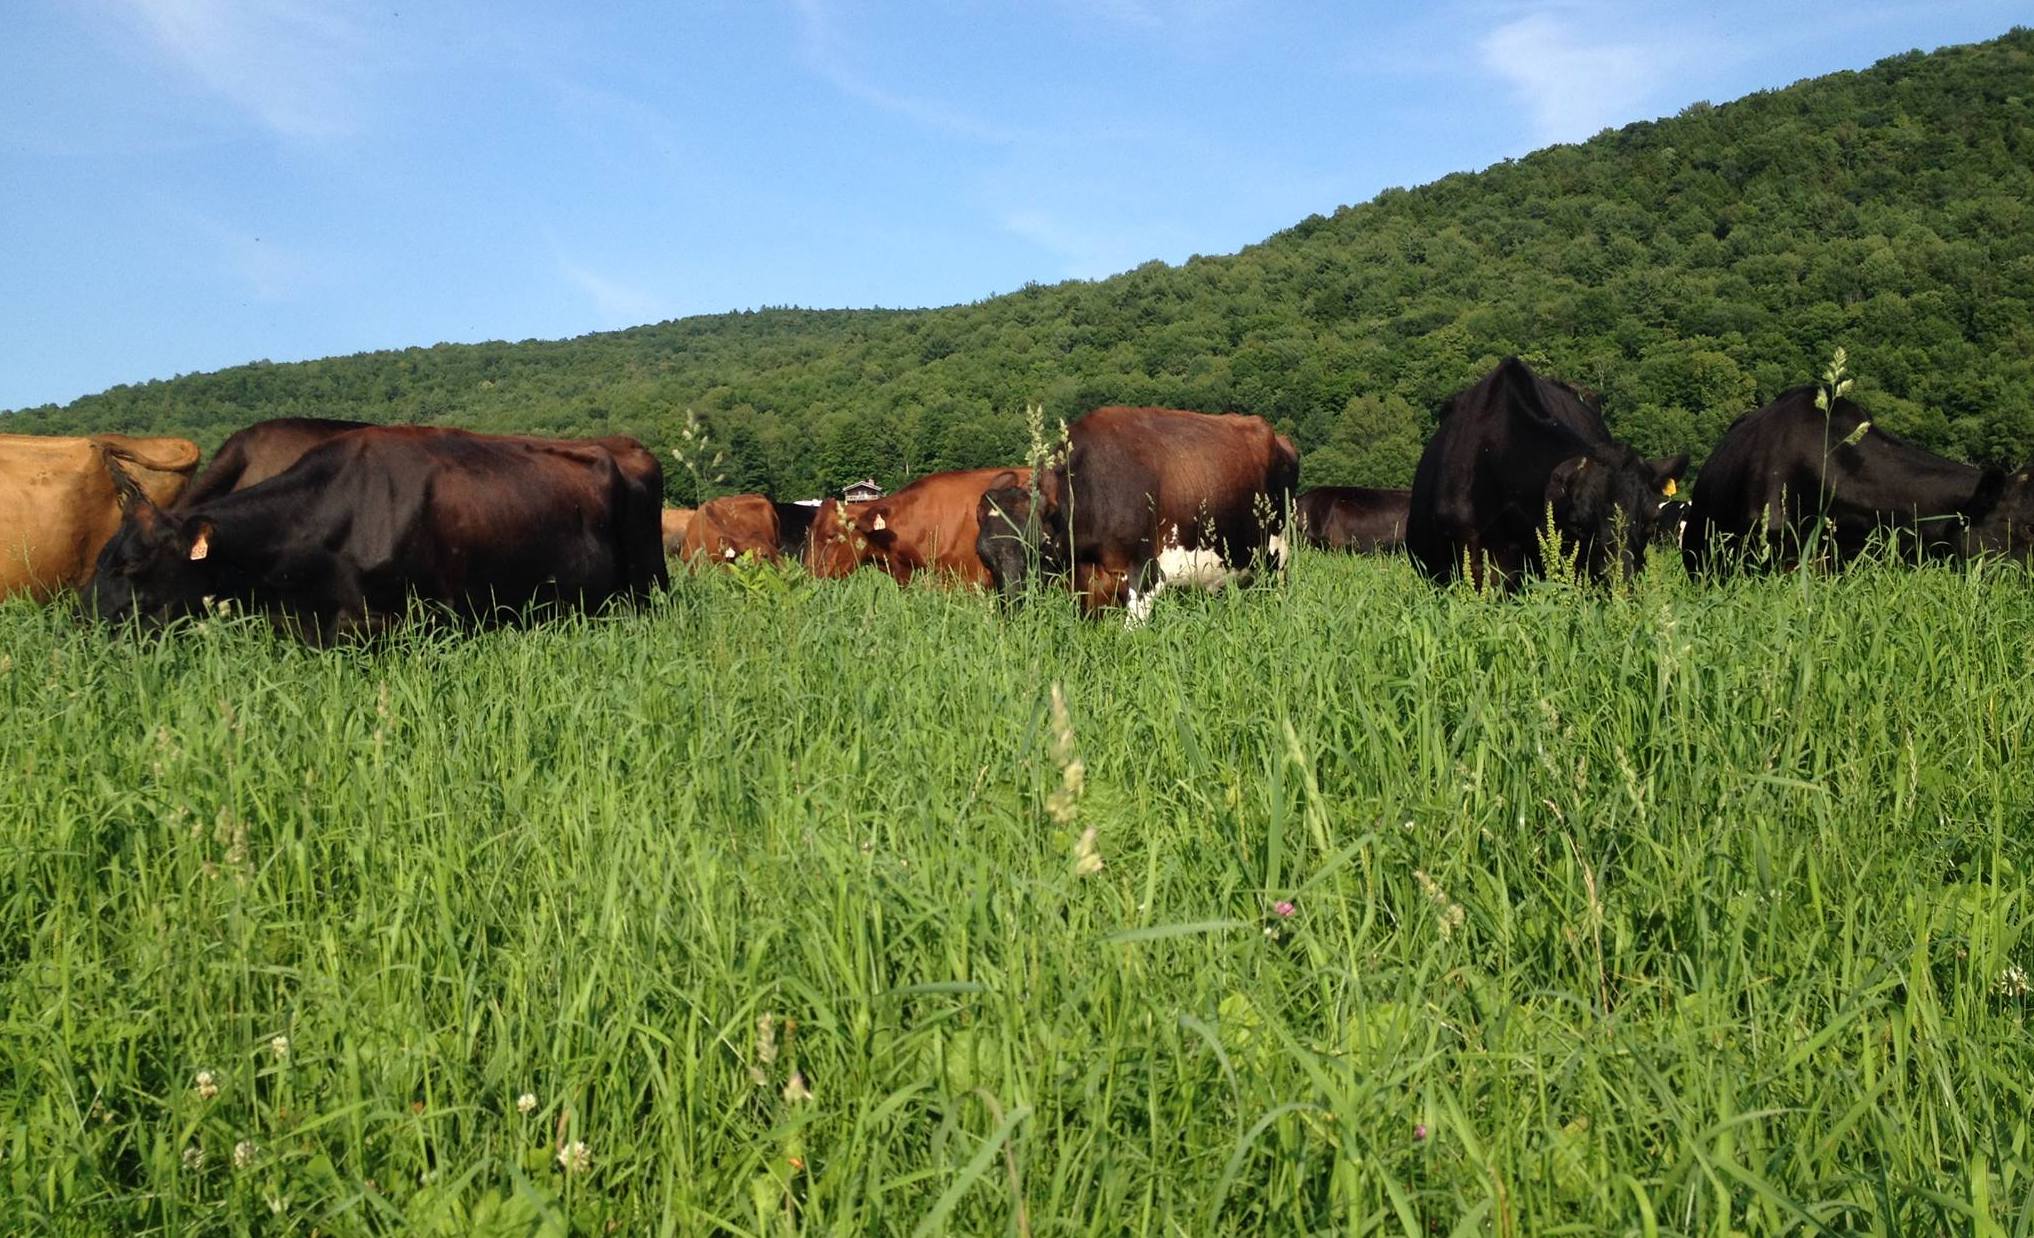 A herd of cows grazing on lush green grass